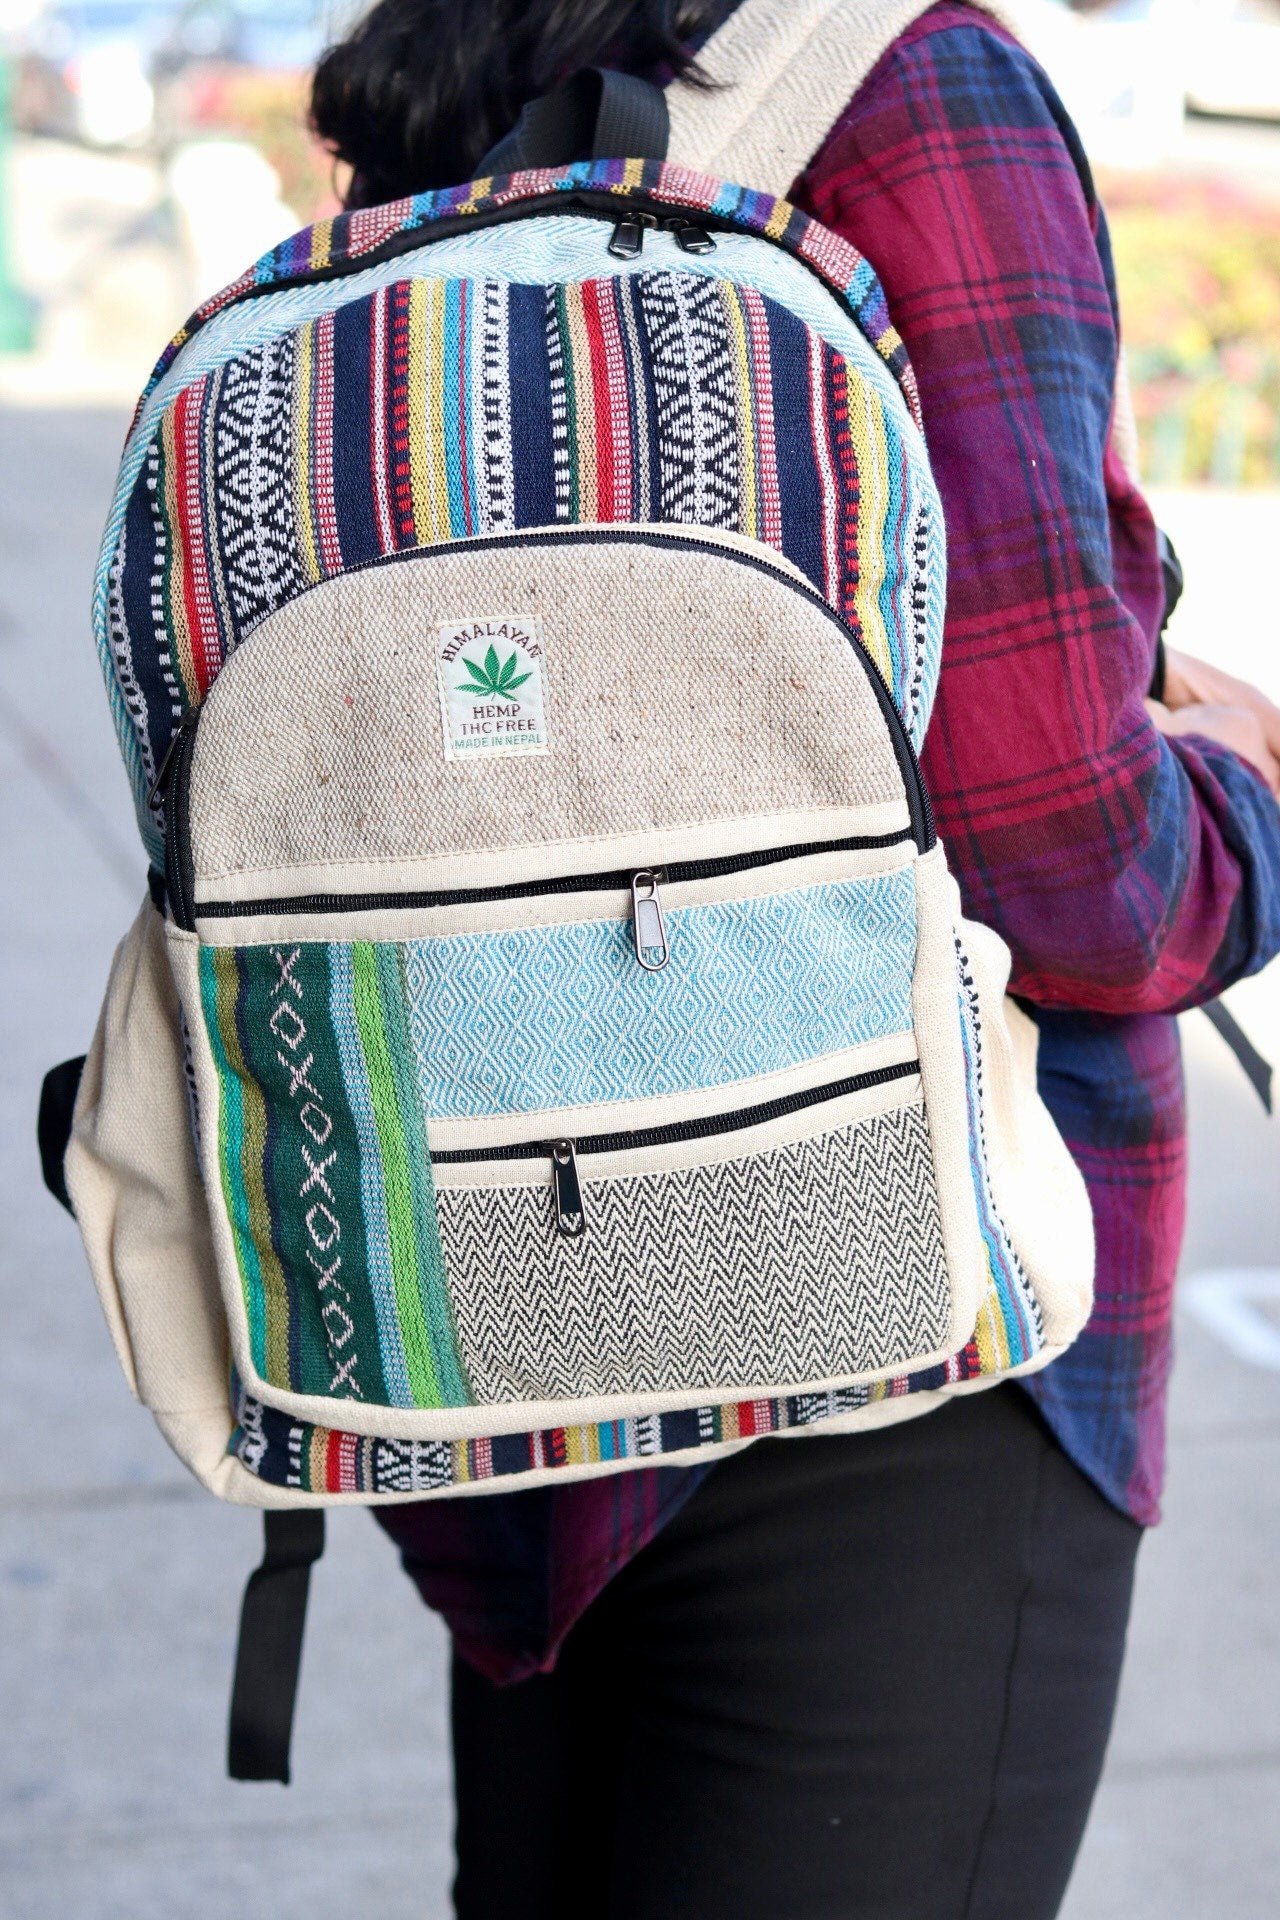 FAST SHIPPING !!! High quality Hemp and Cotton mixed made in Nepal Rucksack Backpack for men and women